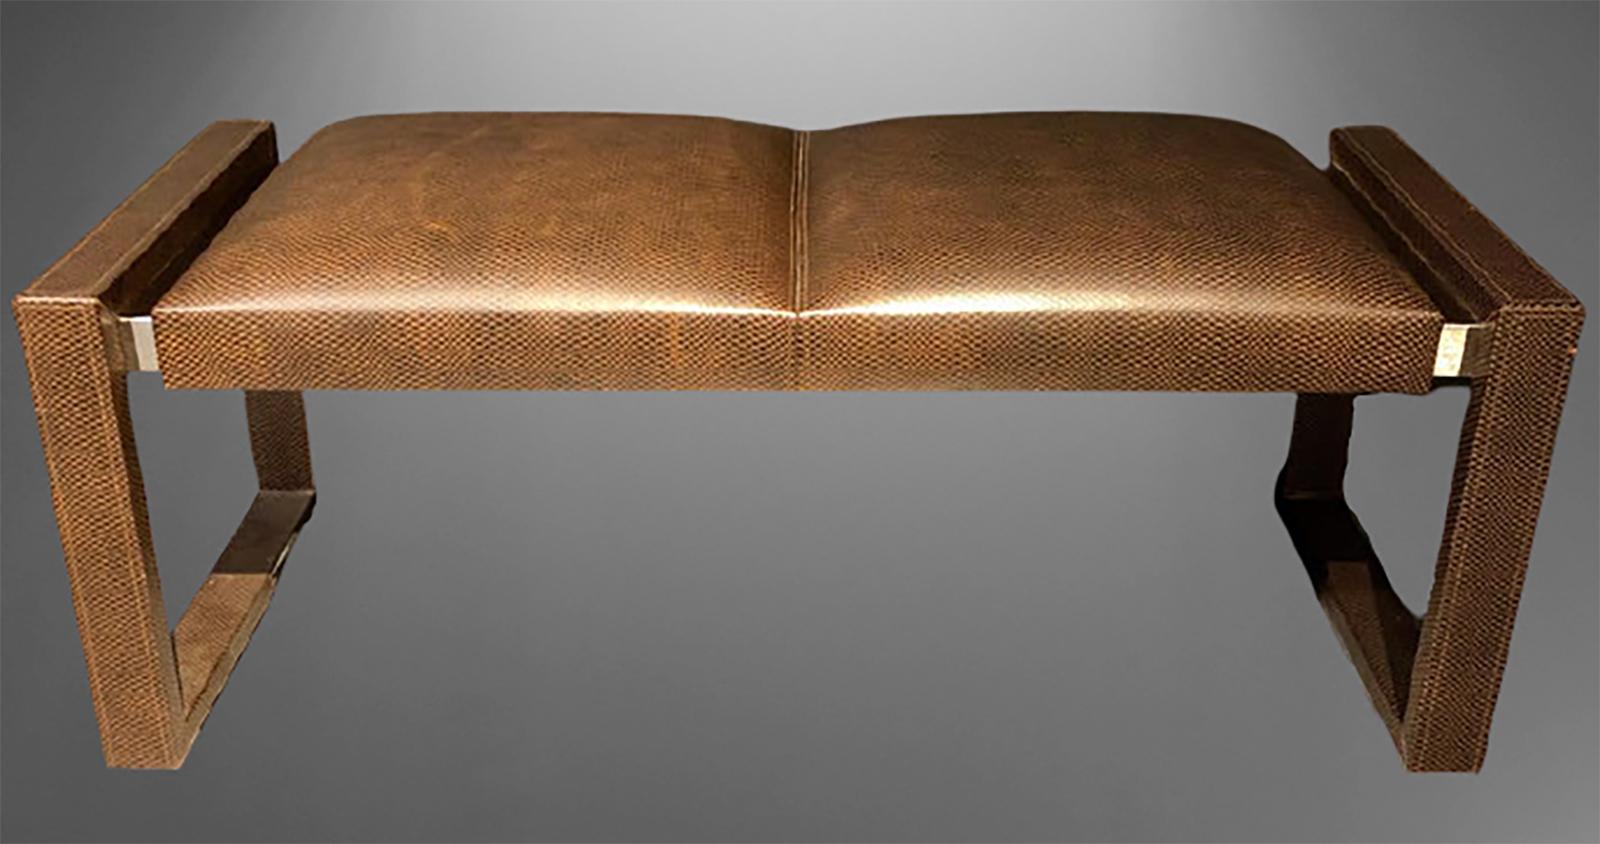 Loren Marsh design bench. New York 2000s. Embossed and stitched leather. Polished stainless steel. Unsigned. This popular box car bench is currently listed at $11,995 on line, approximately four times our listed price. 

In 1975, Lorin Marsh